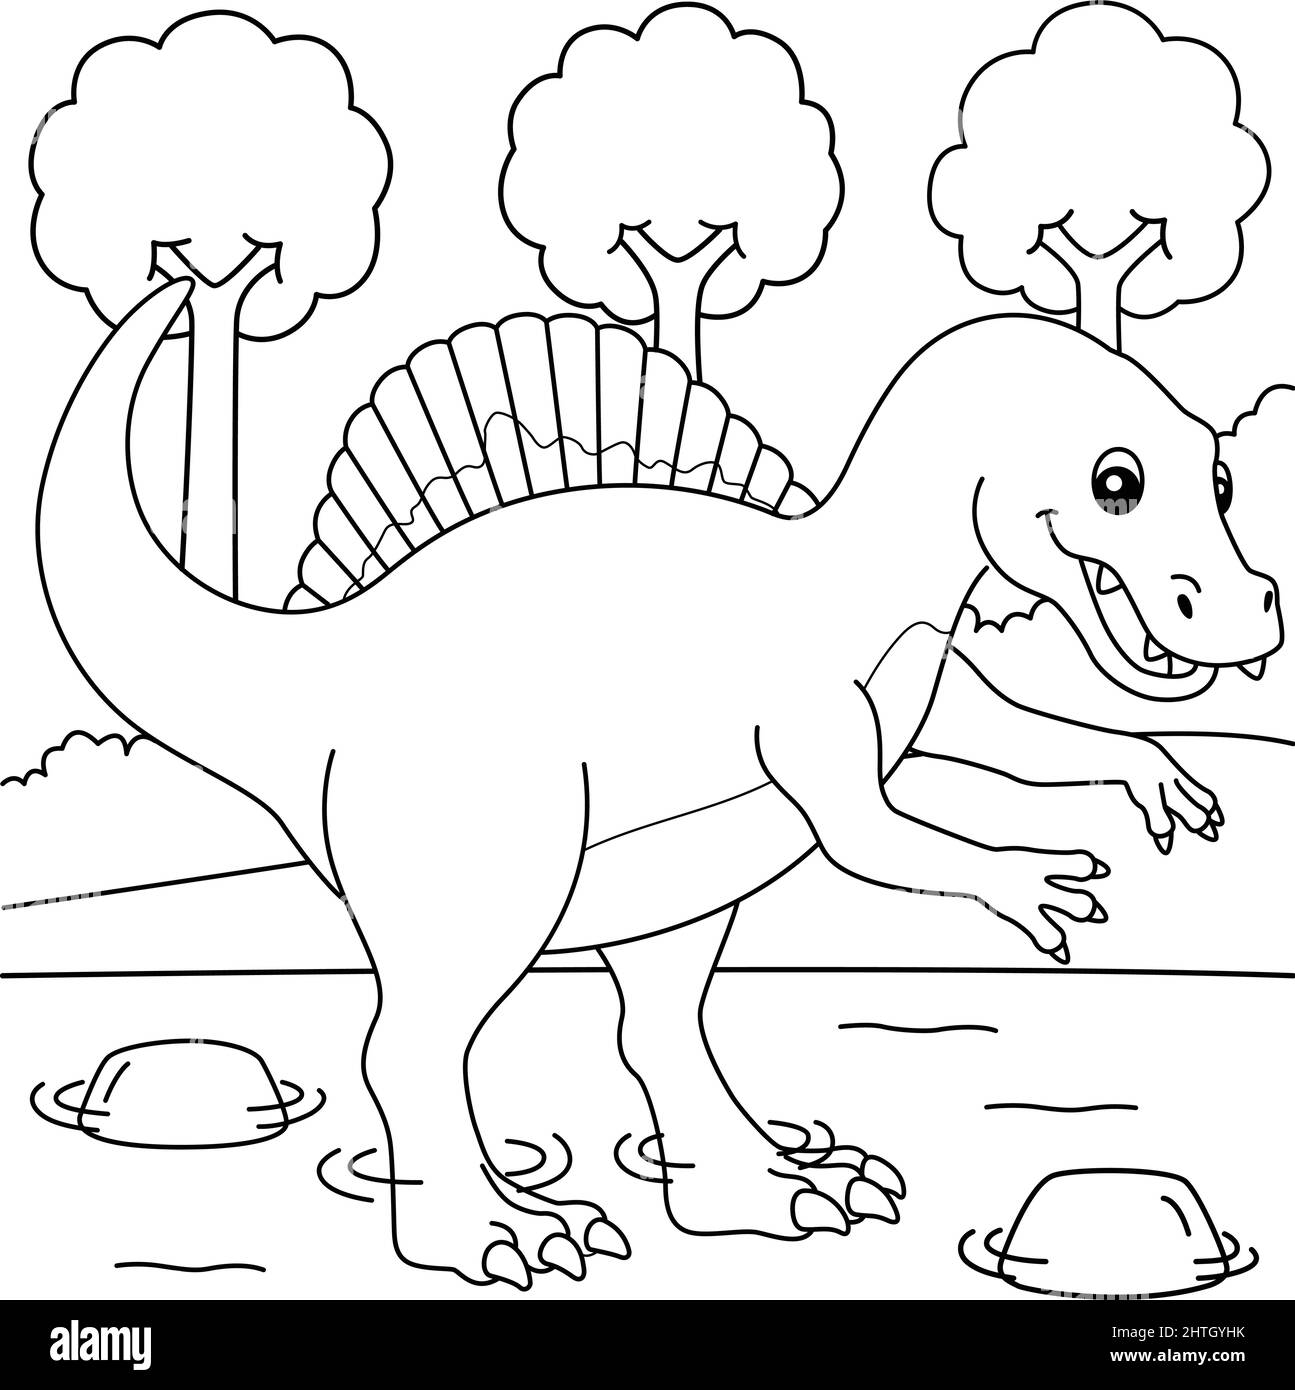 Coloring page for kids with spinosaurus dinosaur and colored preview vector illustration stock vector image art